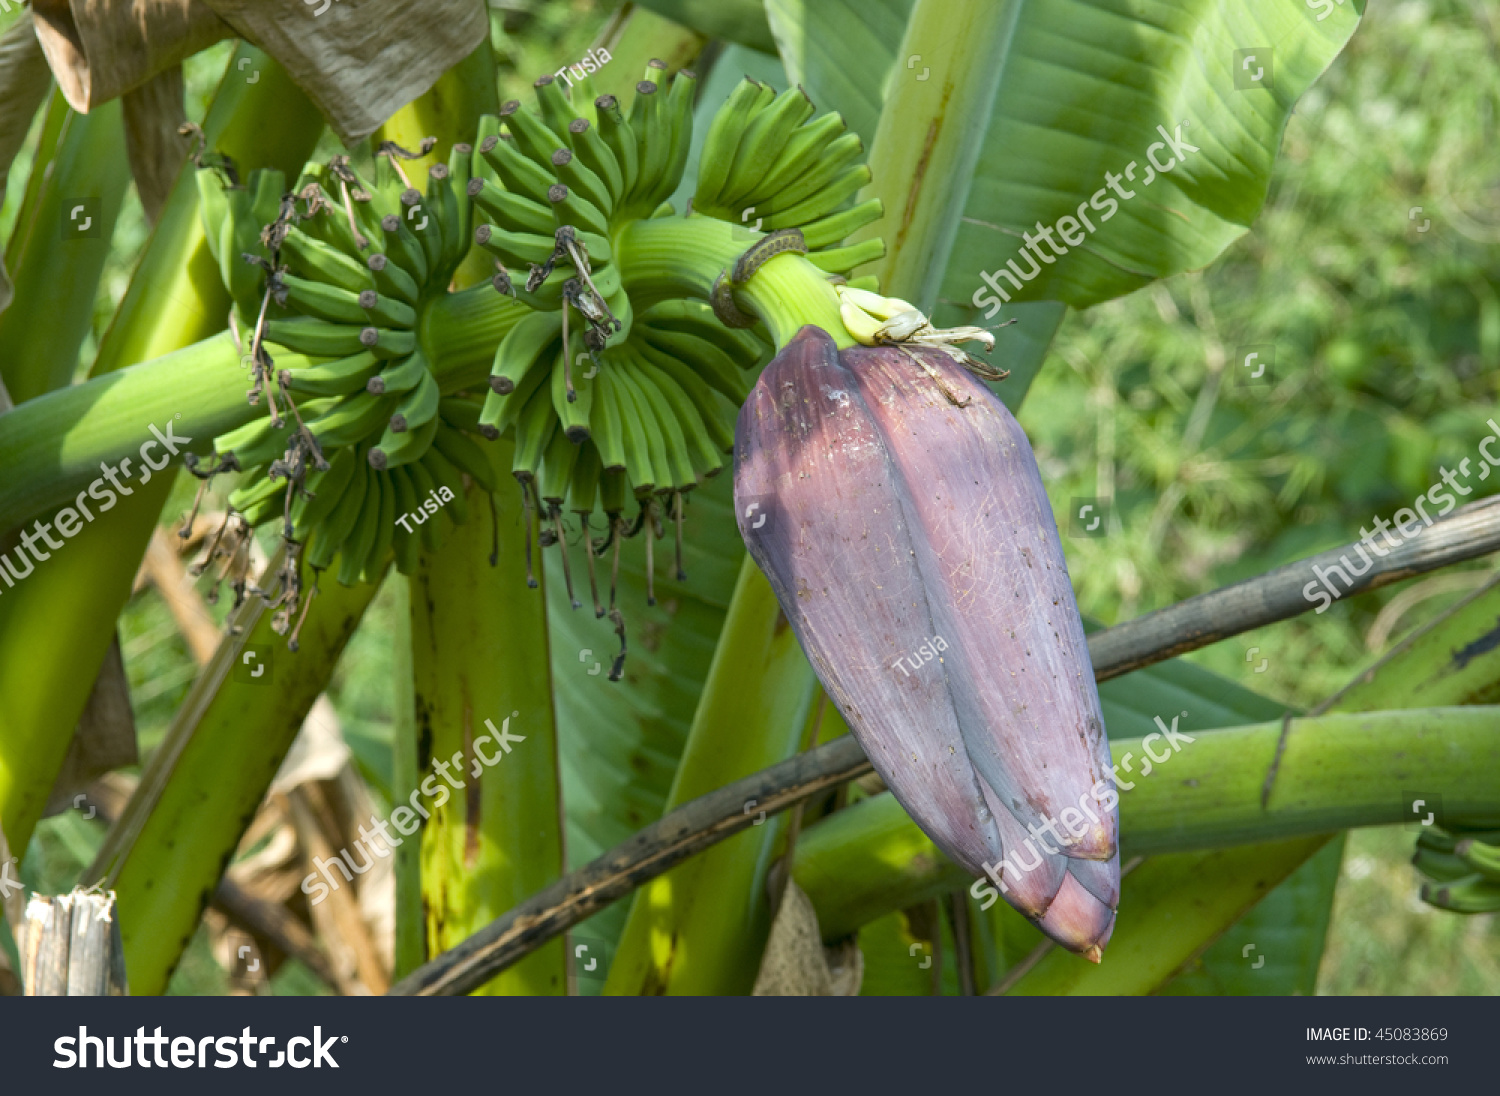 Bananas branch and flower #45083869